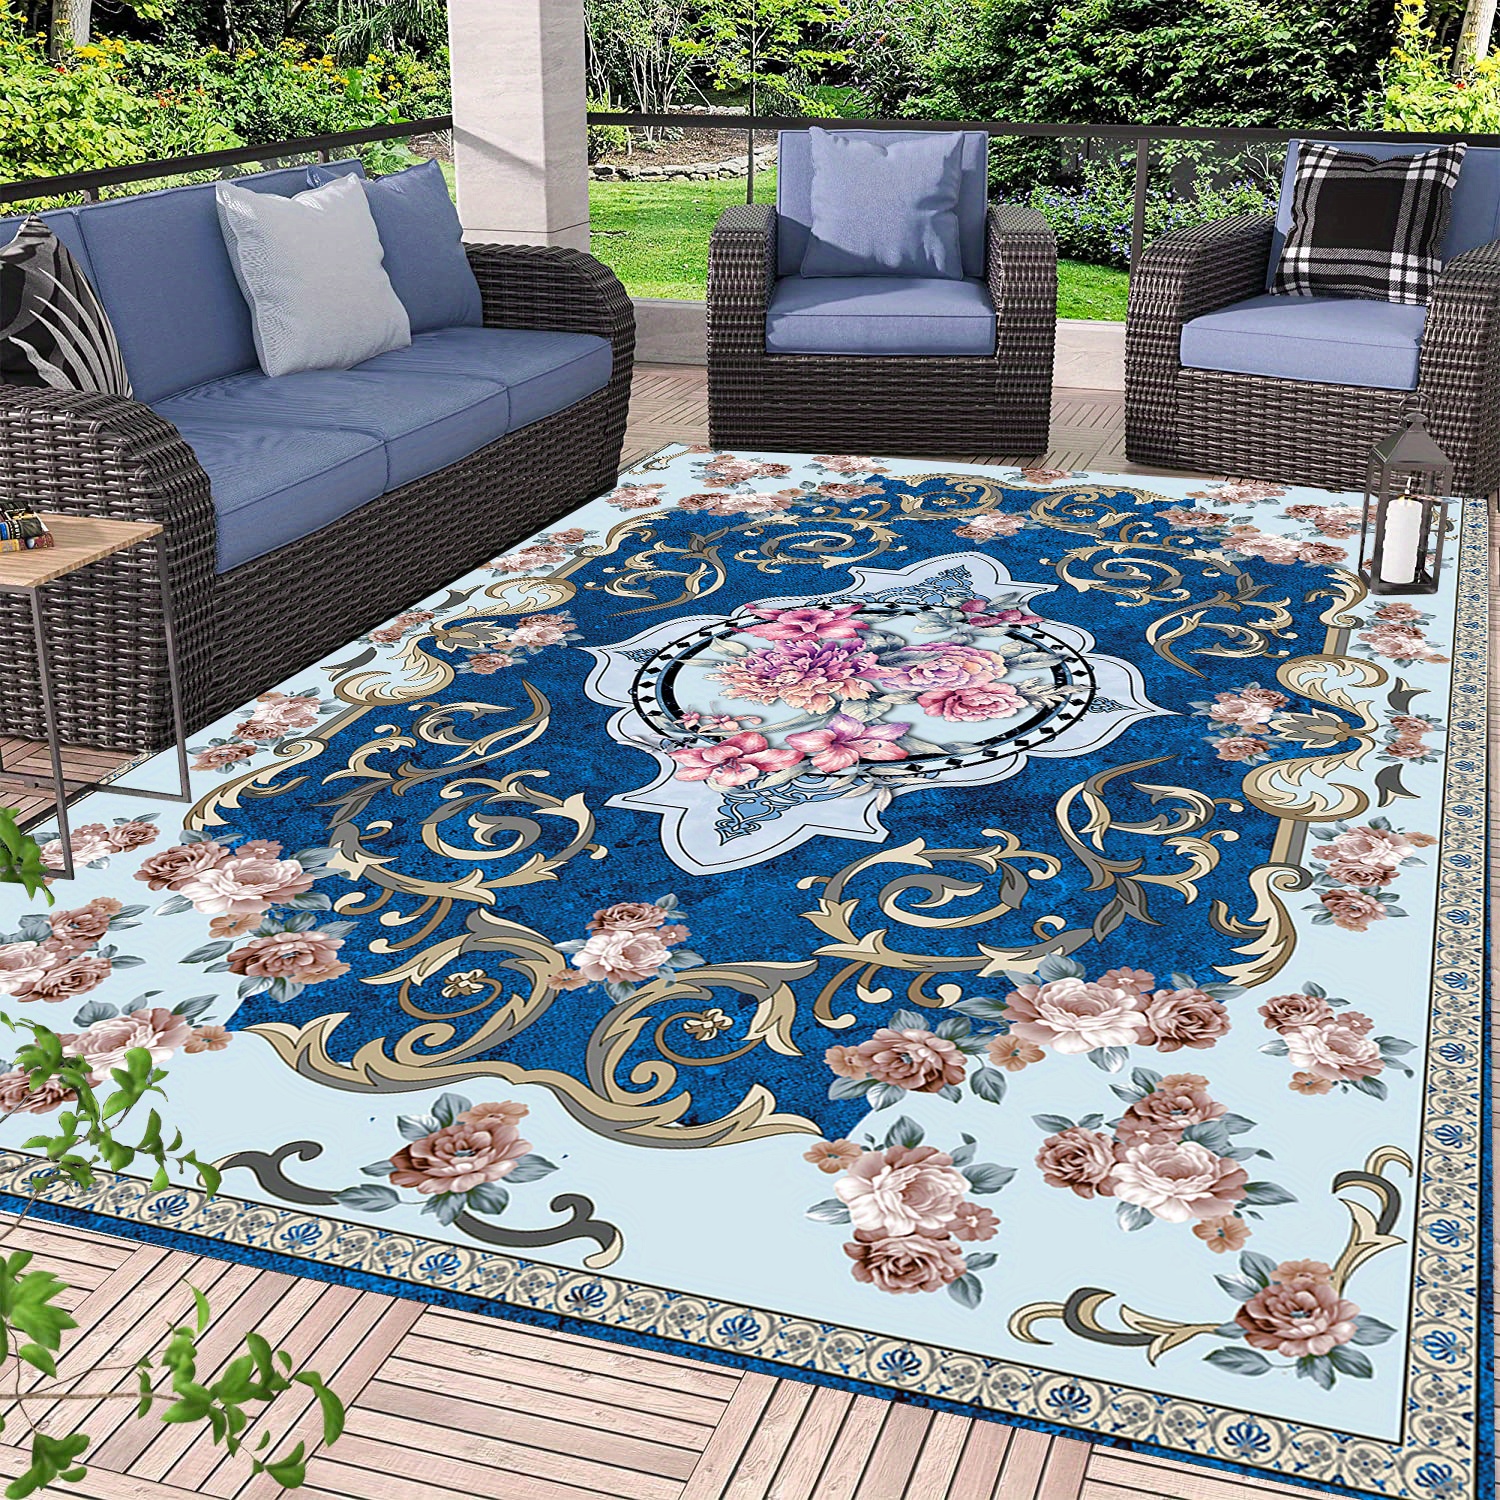 Large Outdoor Rug Mat, Outdoor Rugs For Patios Carpet Camping Rugs